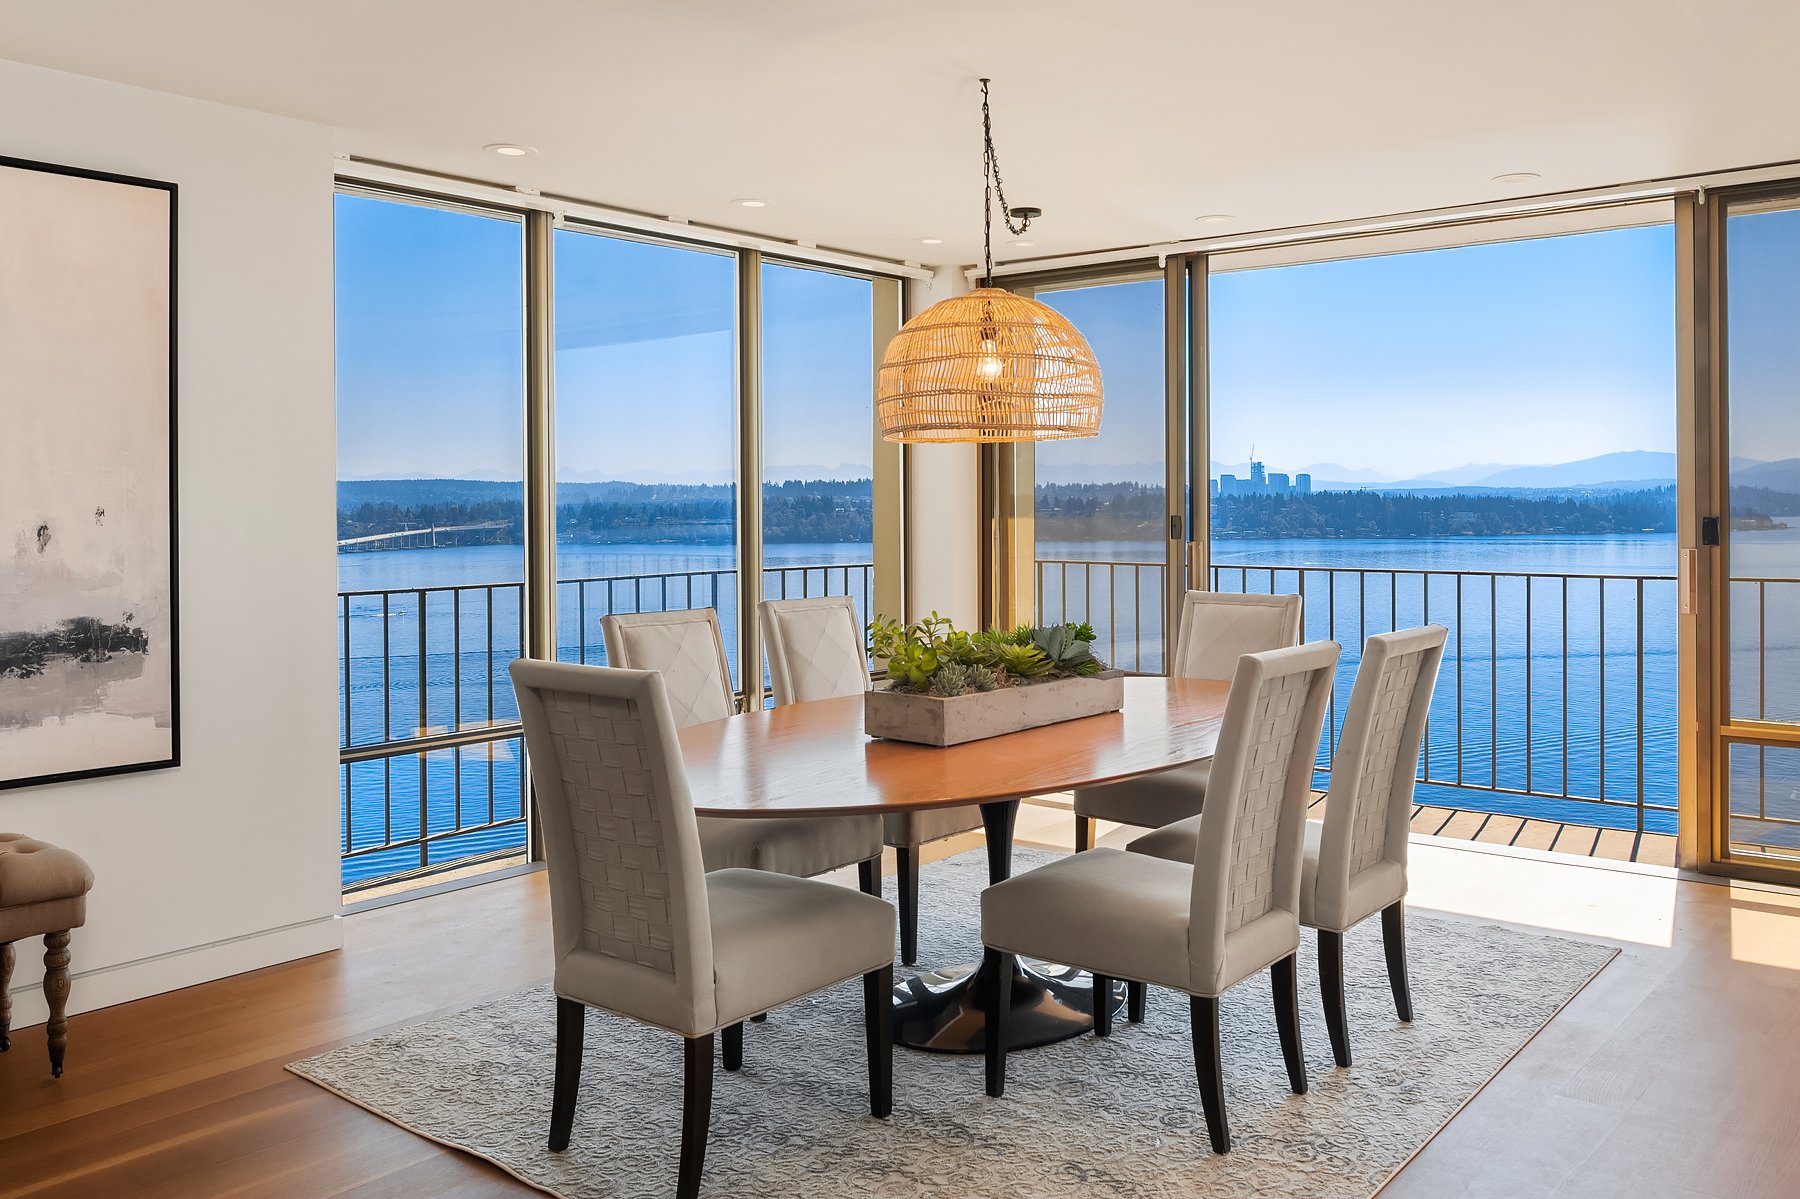  Behind the living room area is the dining room. Imagine hosting your dinner party here with the twinkling lights of the Bellevue skyline all around you. 